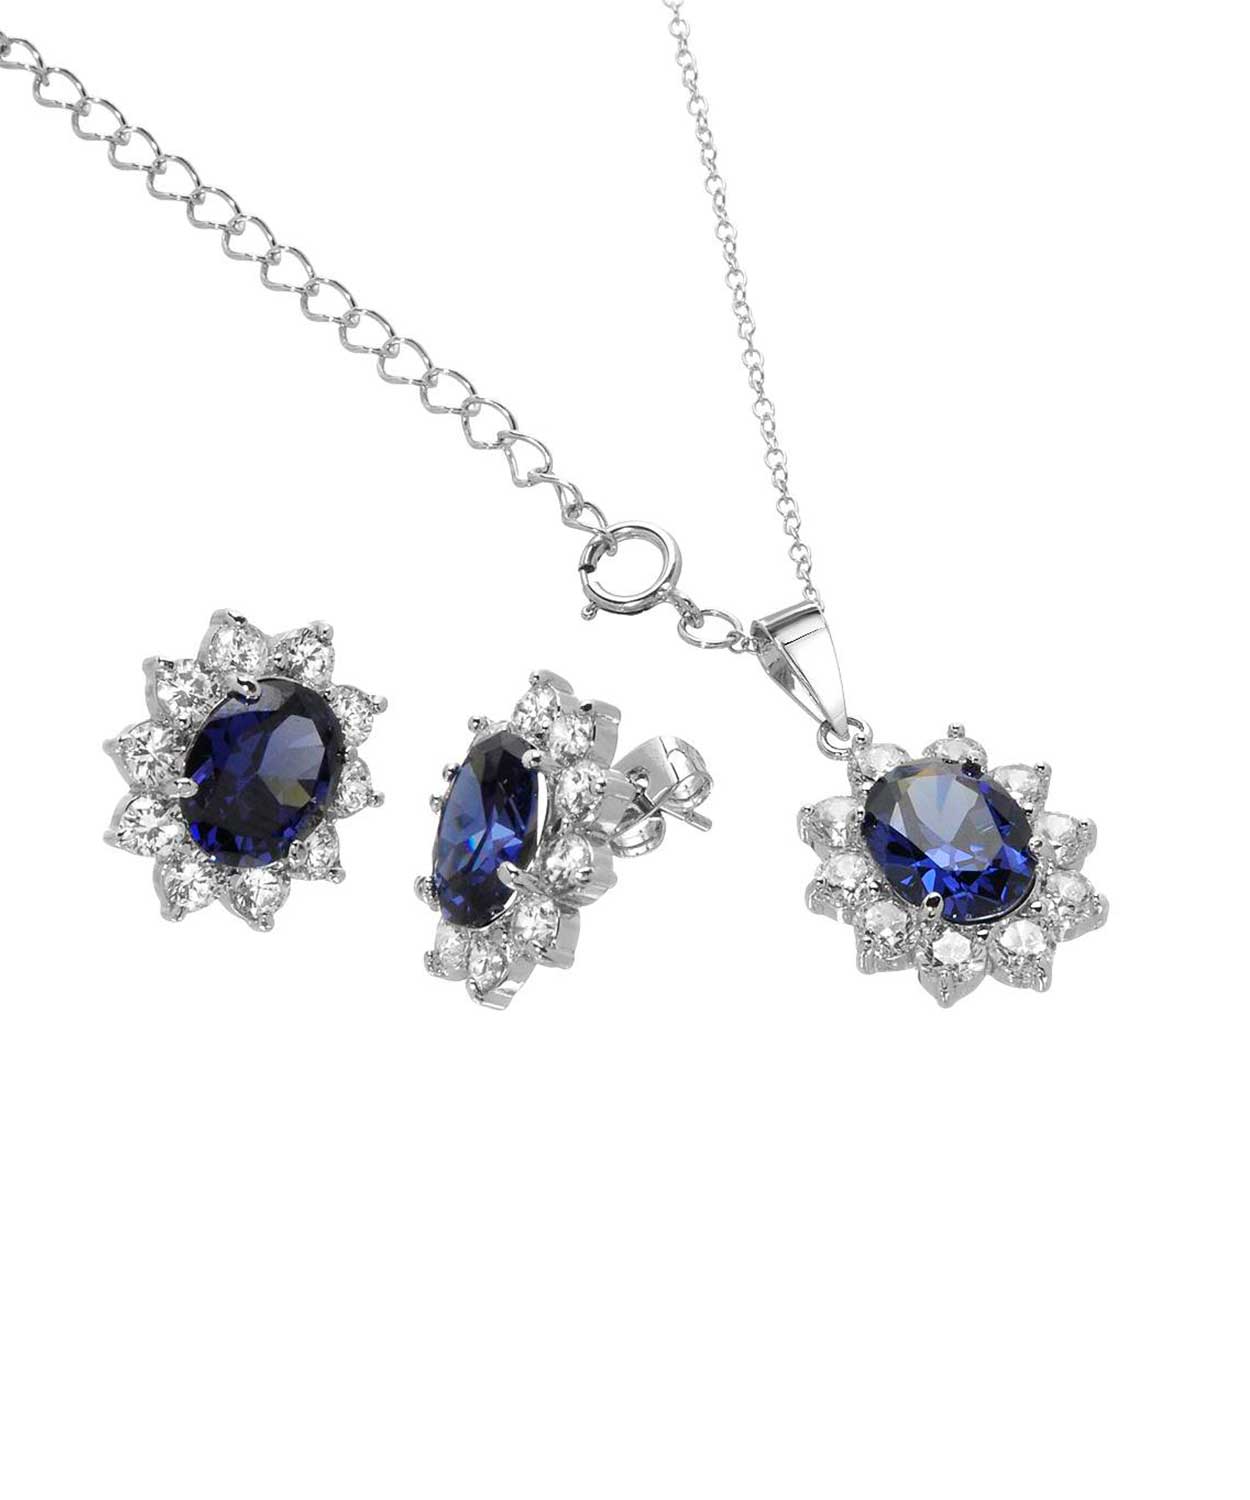 Simulated Royal Blue Sapphire and Brilliant Cut Cubic Zirconia Rhodium Plated 925 Sterling Silver Flower Jewelry Set View 3